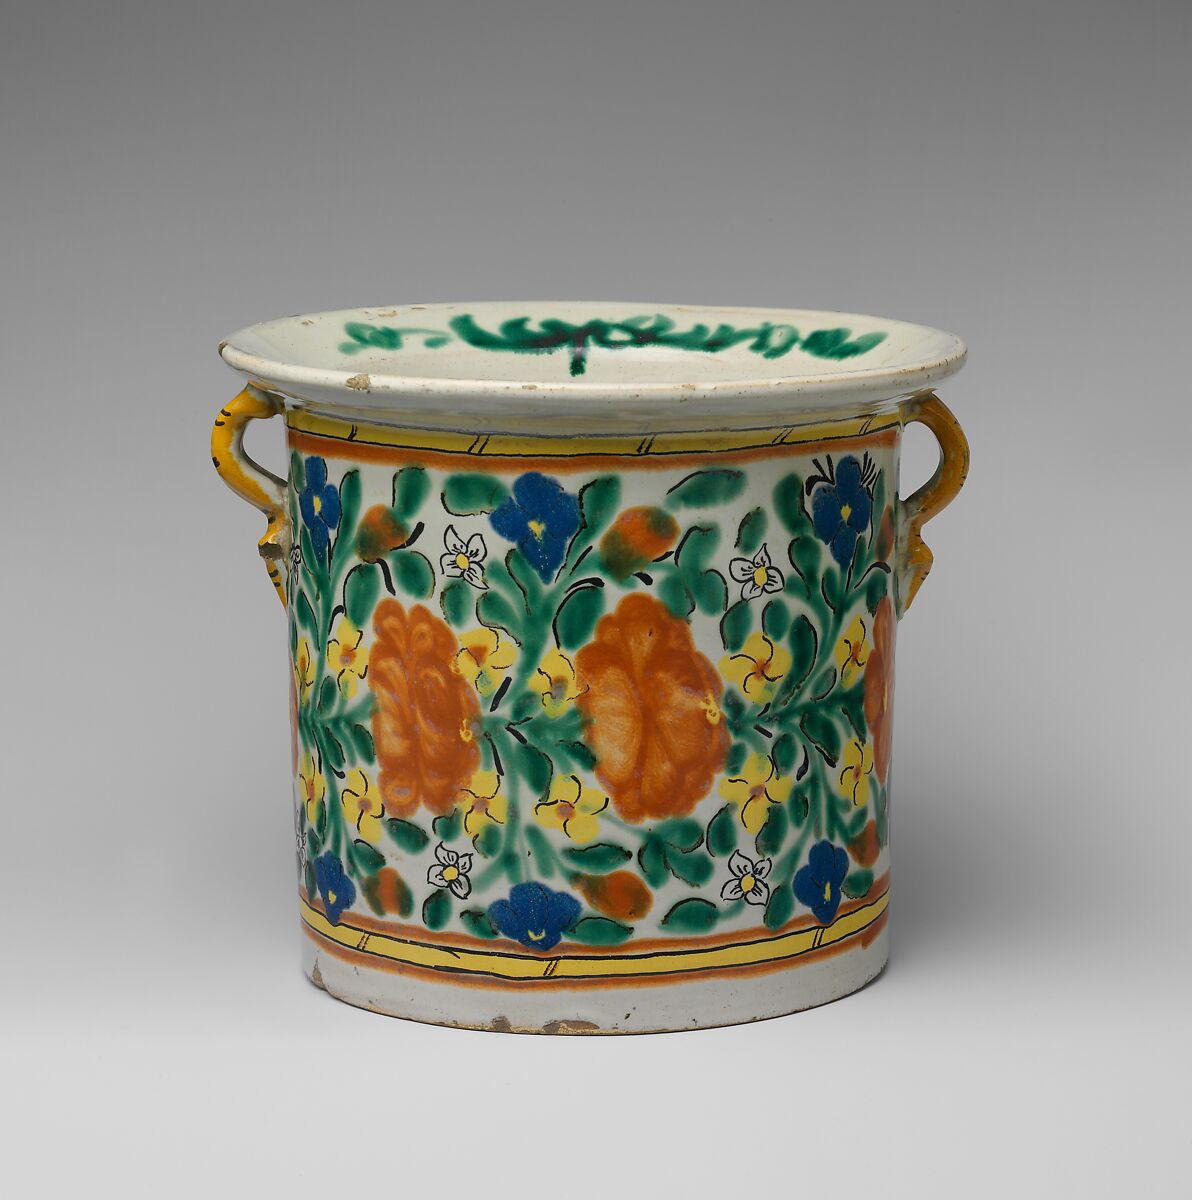 Chamber Pot, Tin-glazed earthenware, Mexican 